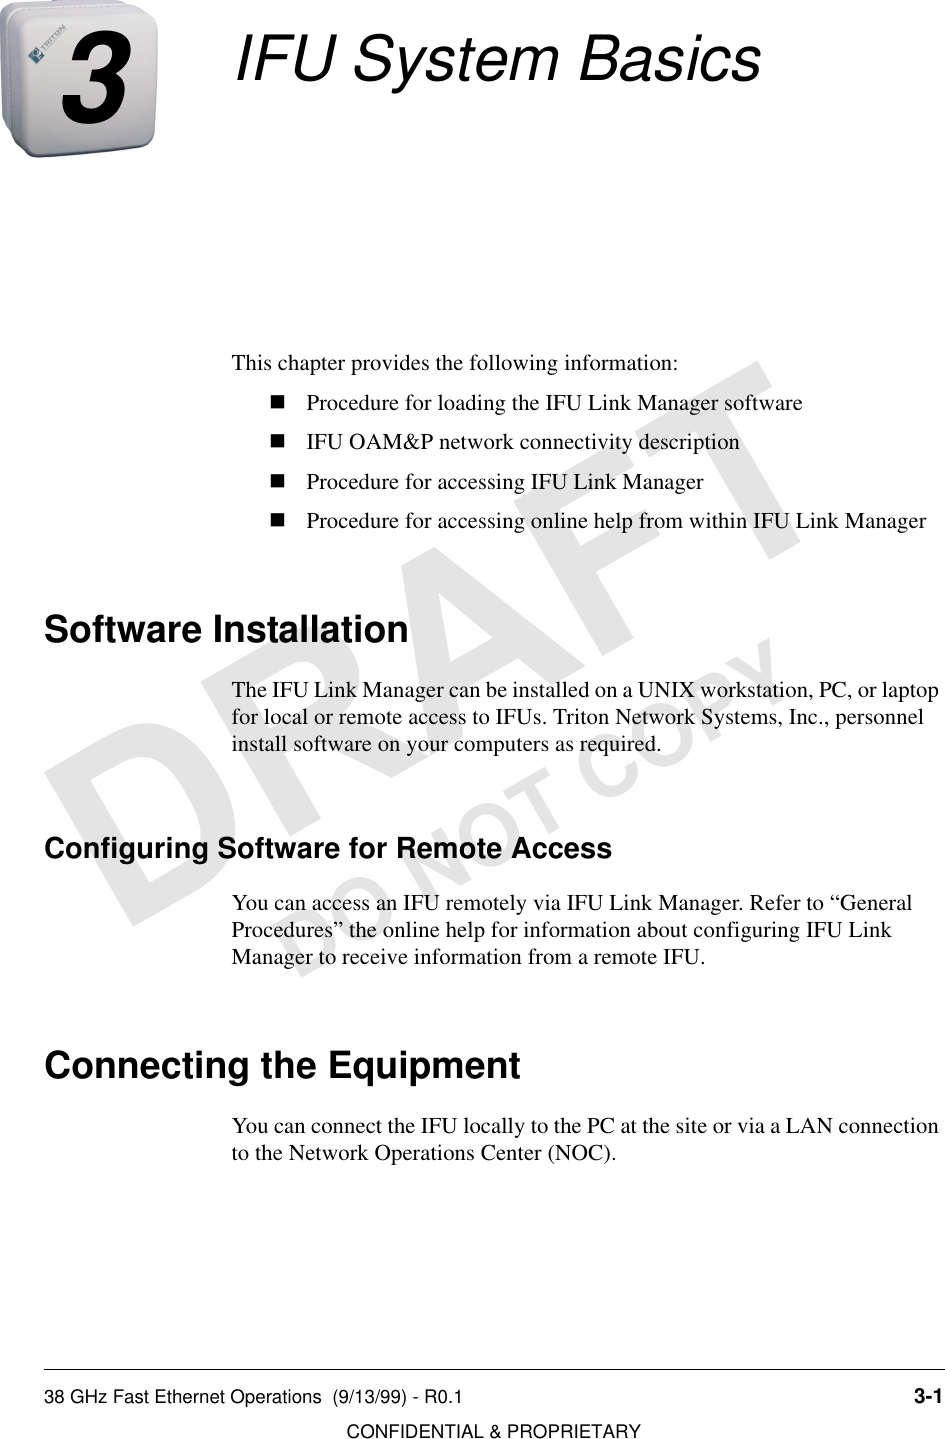 38 GHz Fast Ethernet Operations  (9/13/99) - R0.1 3-1CONFIDENTIAL &amp; PROPRIETARYDO NOT COPY3IFU System BasicsThis chapter provides the following information:nProcedure for loading the IFU Link Manager softwarenIFU OAM&amp;P network connectivity descriptionnProcedure for accessing IFU Link ManagernProcedure for accessing online help from within IFU Link ManagerSoftware InstallationThe IFU Link Manager can be installed on a UNIX workstation, PC, or laptop for local or remote access to IFUs. Triton Network Systems, Inc., personnel install software on your computers as required.Configuring Software for Remote AccessYou can access an IFU remotely via IFU Link Manager. Refer to “General Procedures” the online help for information about configuring IFU Link Manager to receive information from a remote IFU.Connecting the EquipmentYou can connect the IFU locally to the PC at the site or via a LAN connection to the Network Operations Center (NOC).